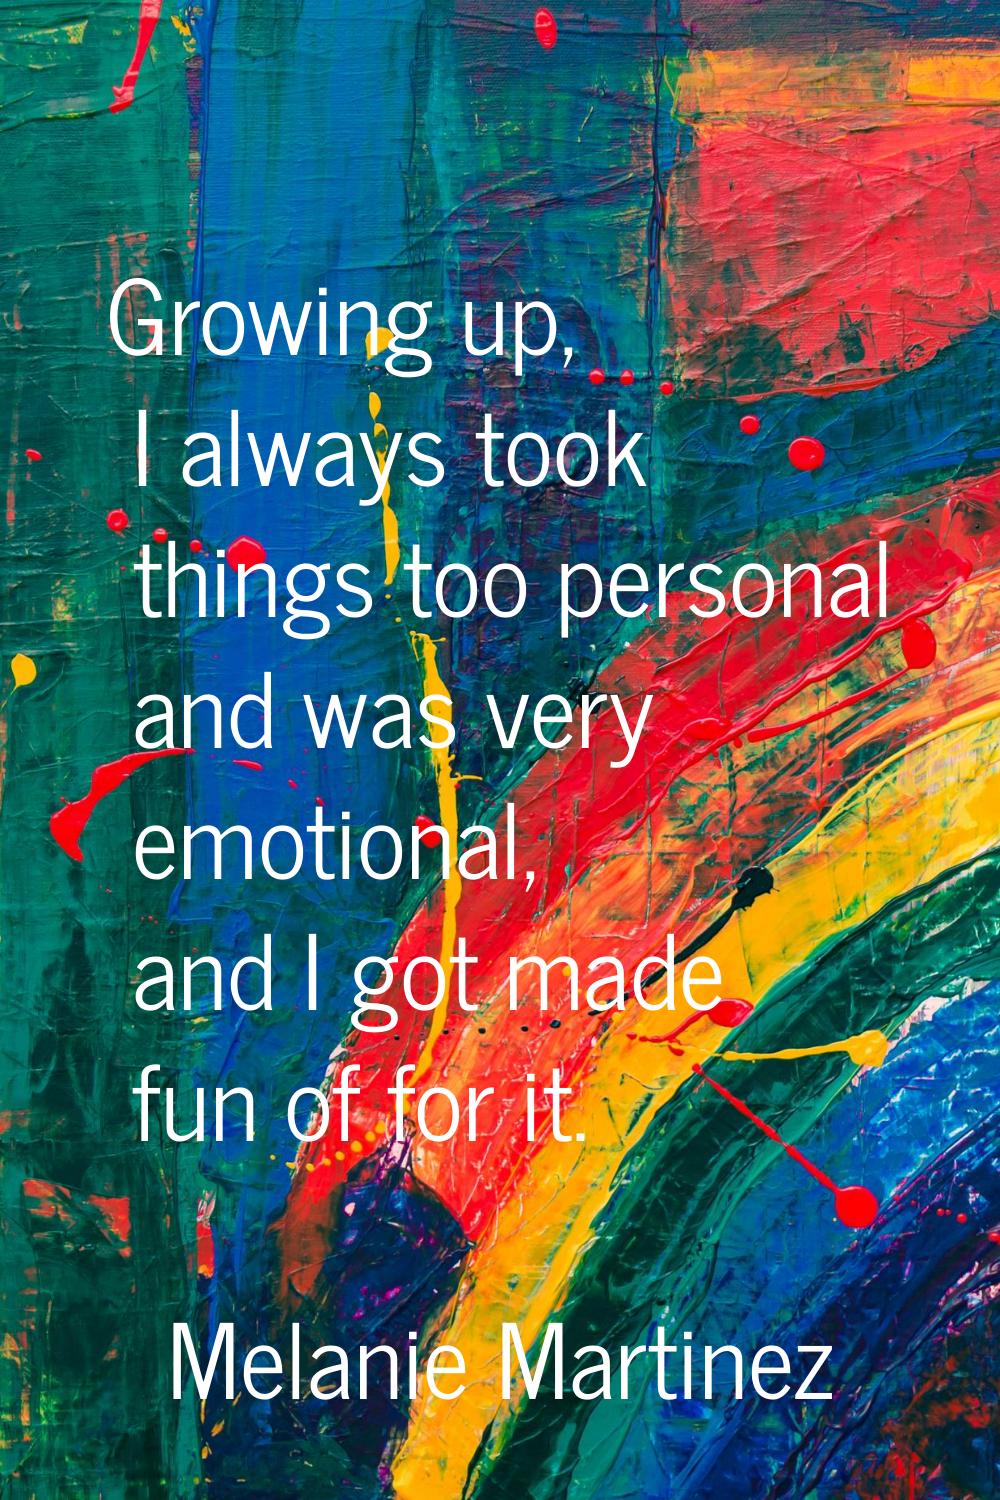 Growing up, I always took things too personal and was very emotional, and I got made fun of for it.